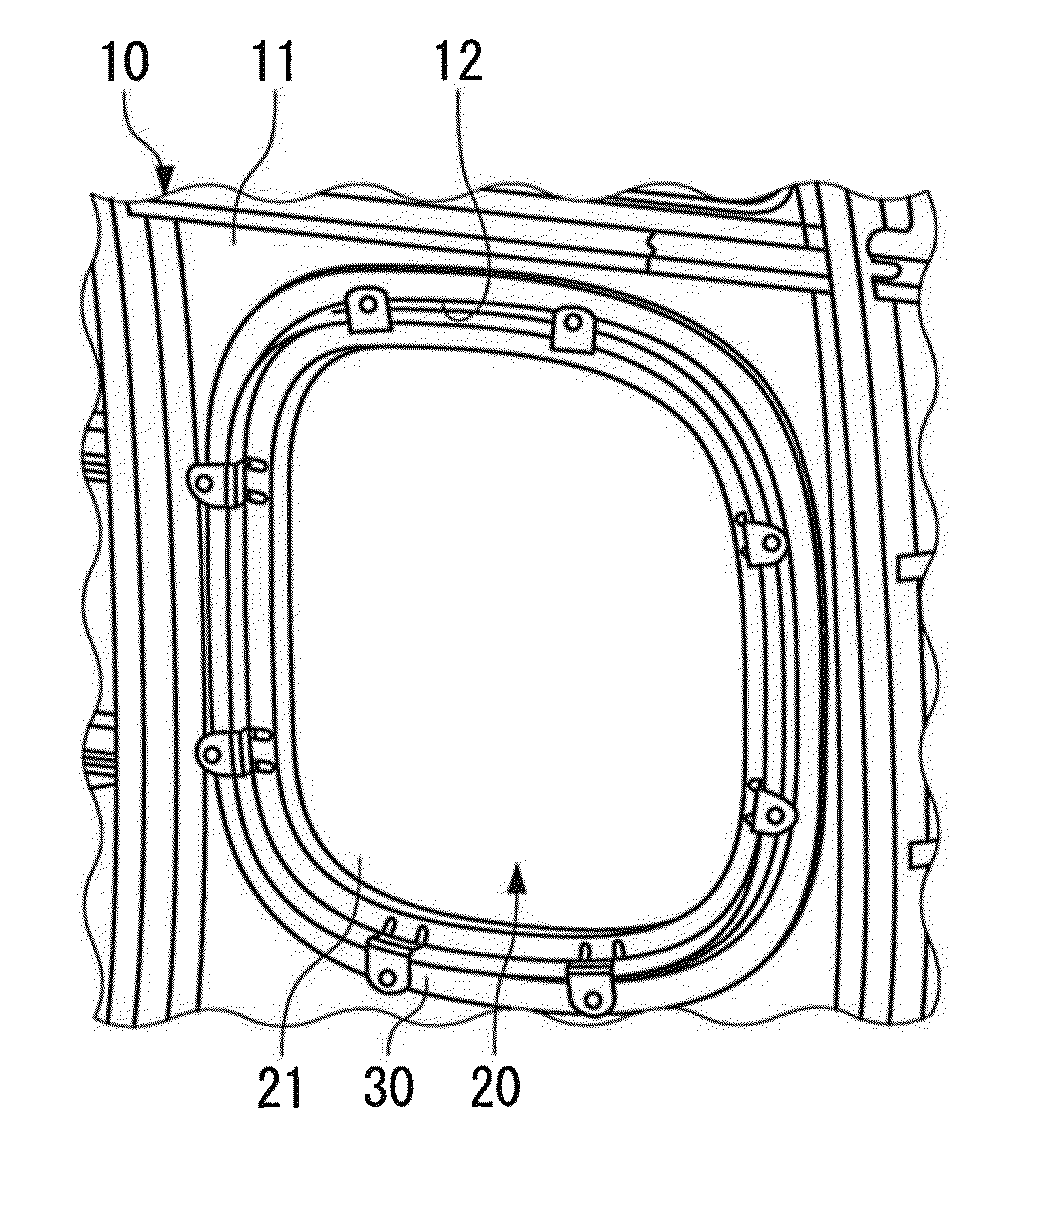 Window of aircraft, closing member for opening and gasket seal